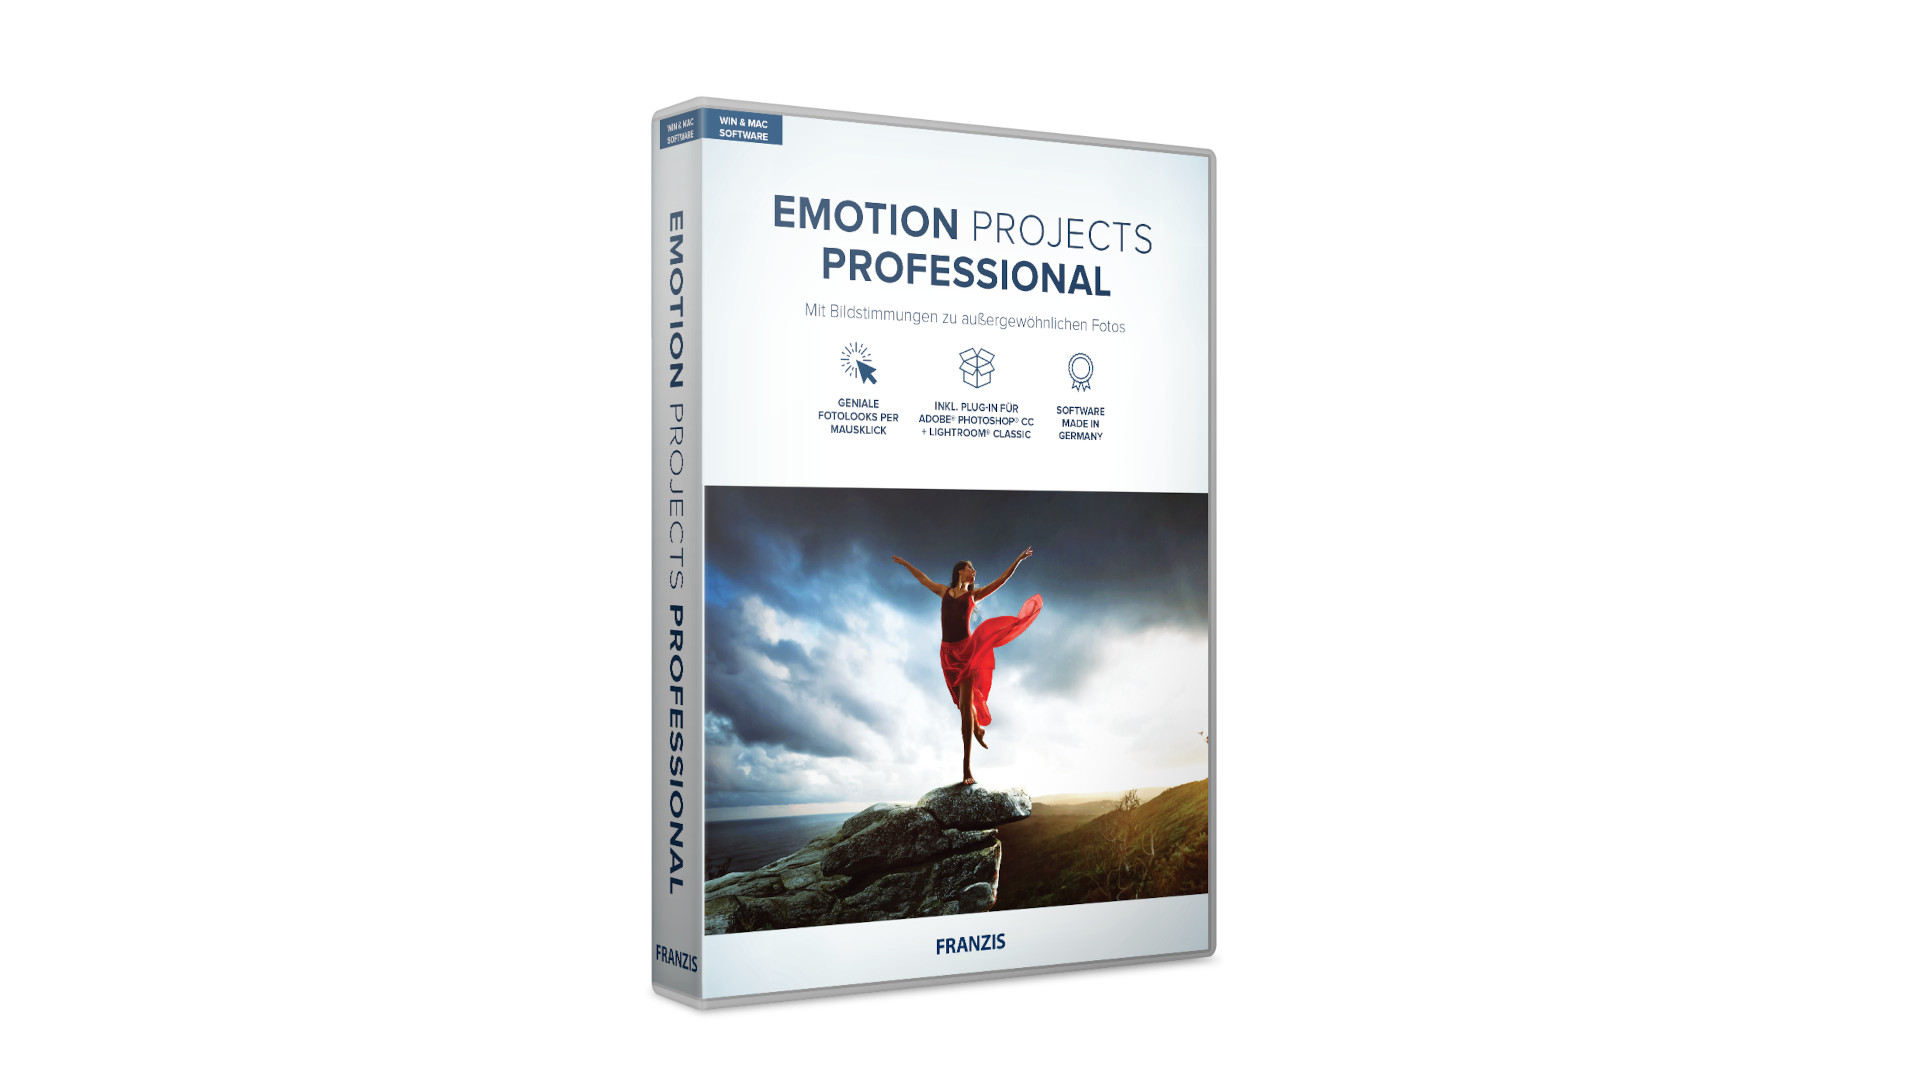 [$ 33.89] EMOTION Projects Professional - Project Software Key (Lifetime / 1 PC)